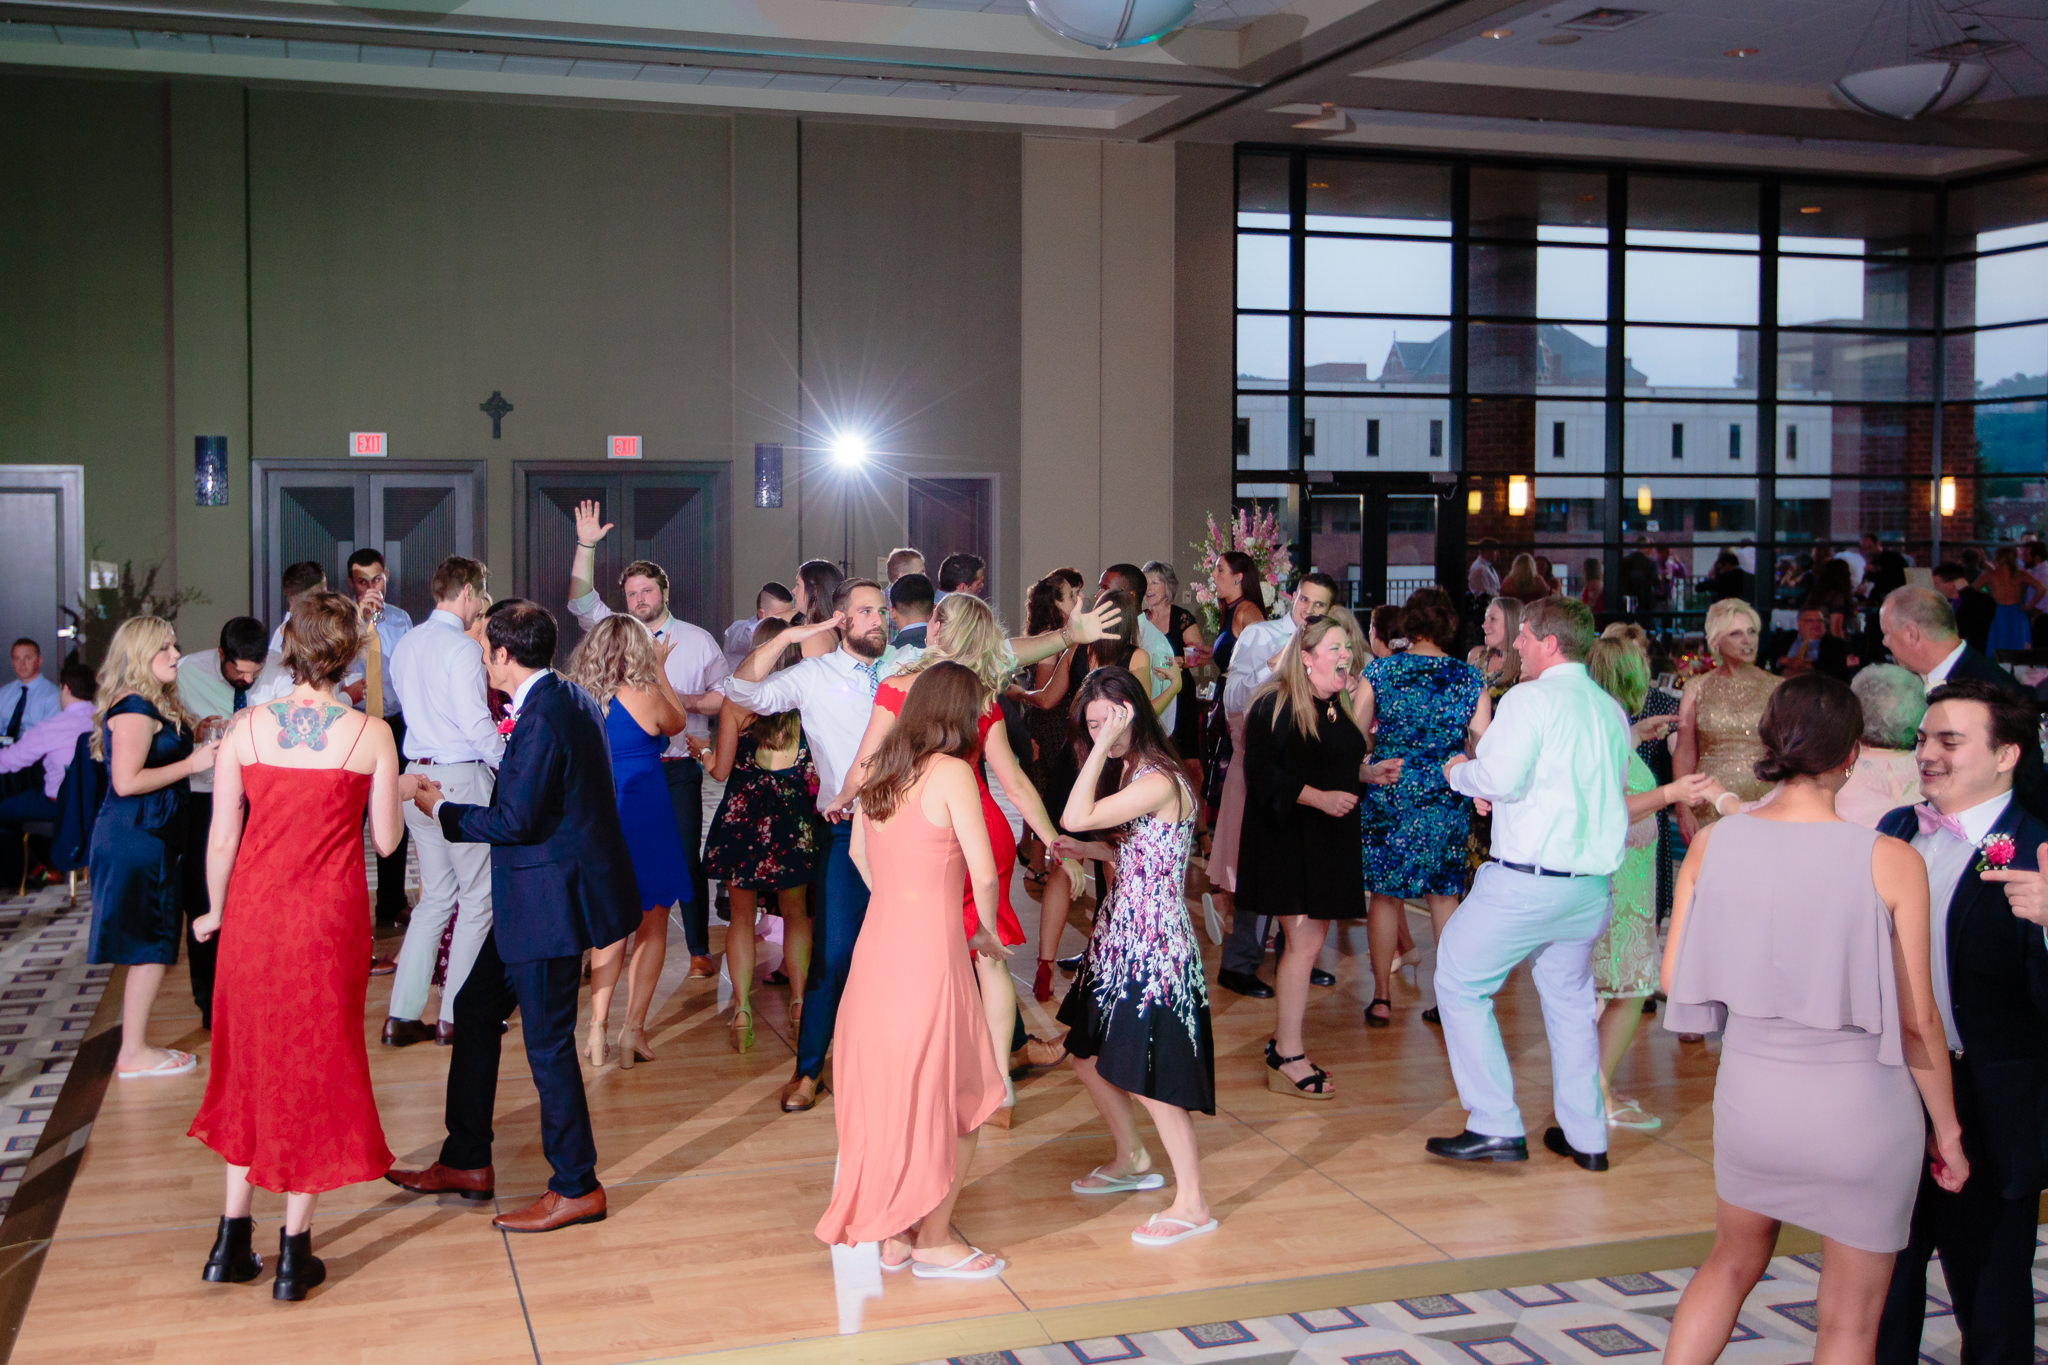 Packed dance floor for a Duquesne University wedding reception in the Charles J. Dougherty ballroom